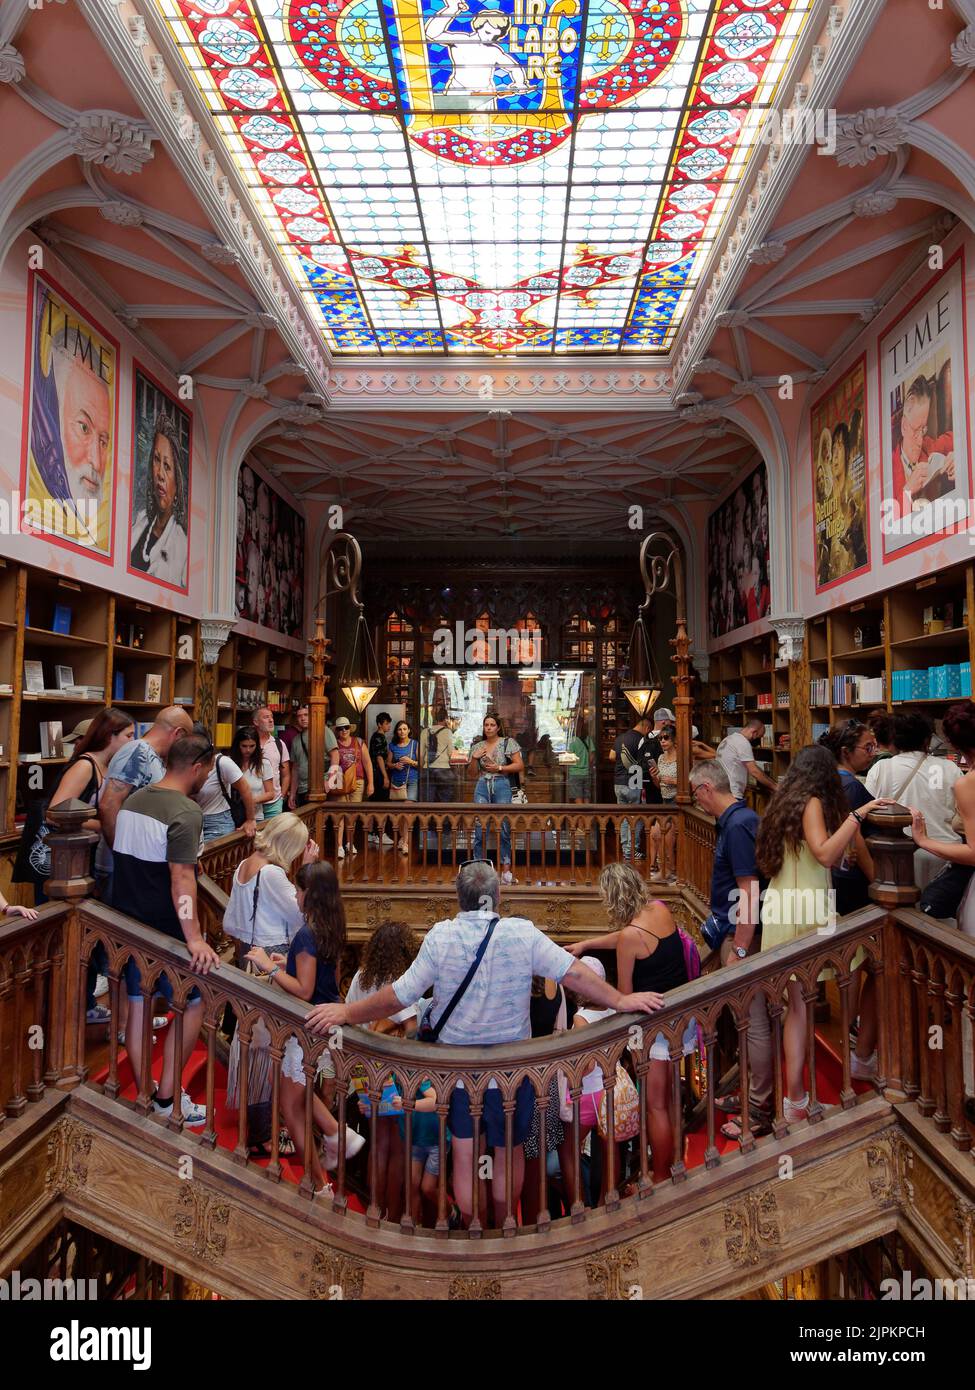 Interior of the beautiful Livraria Lello aka Lello Bookstore in Porto, Portugal. Stained glass windows and Time Magazine covers are on the walls. Stock Photo